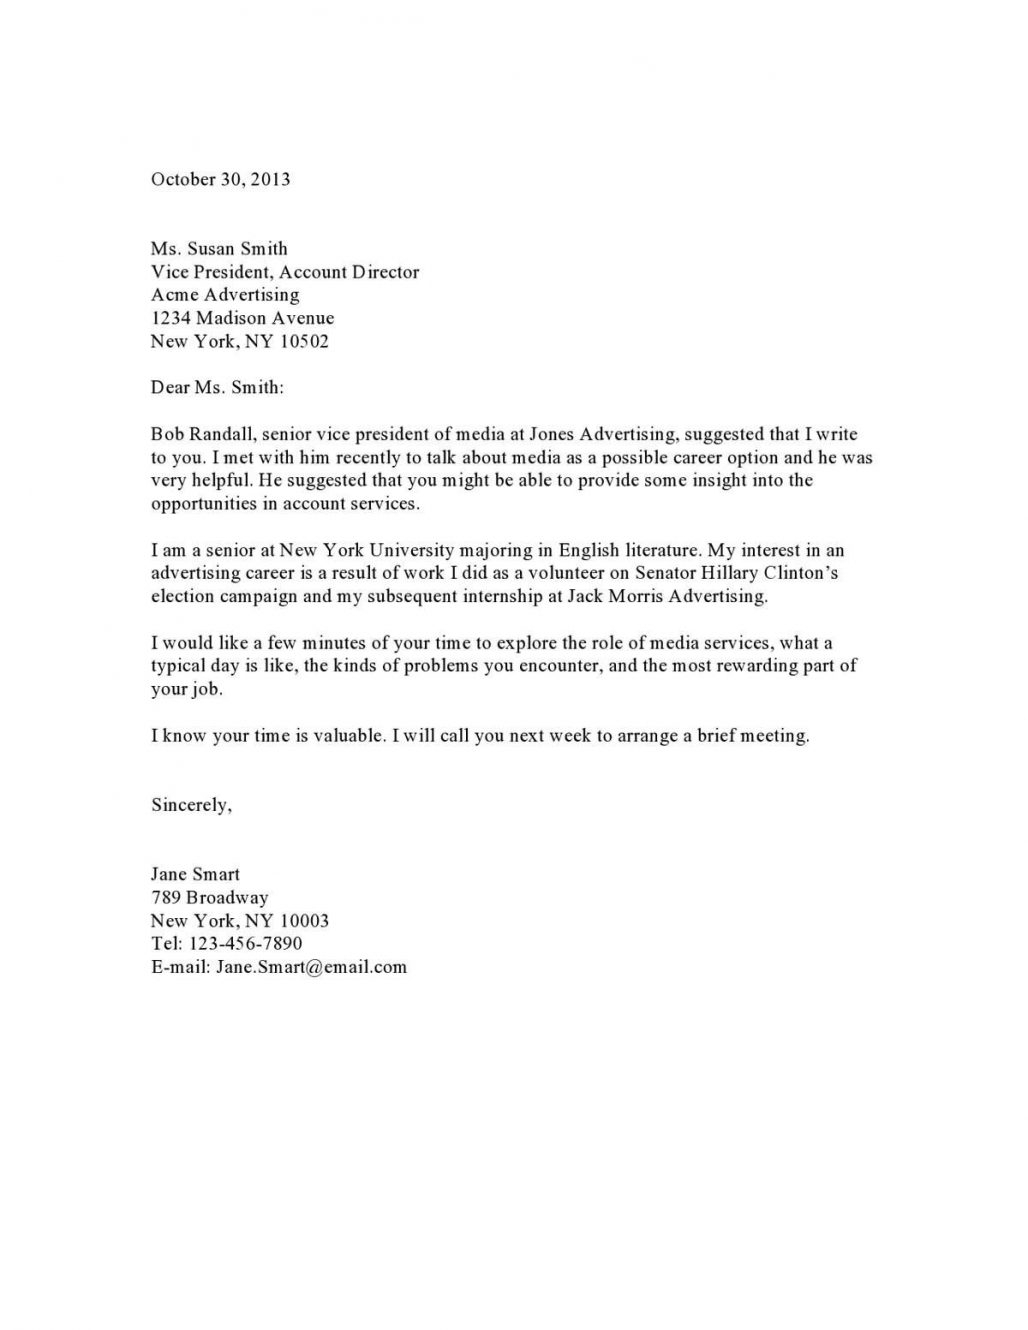 Court ordered Community Service Letter Template - How to Write A Munity Service Letter Gallery Letter format